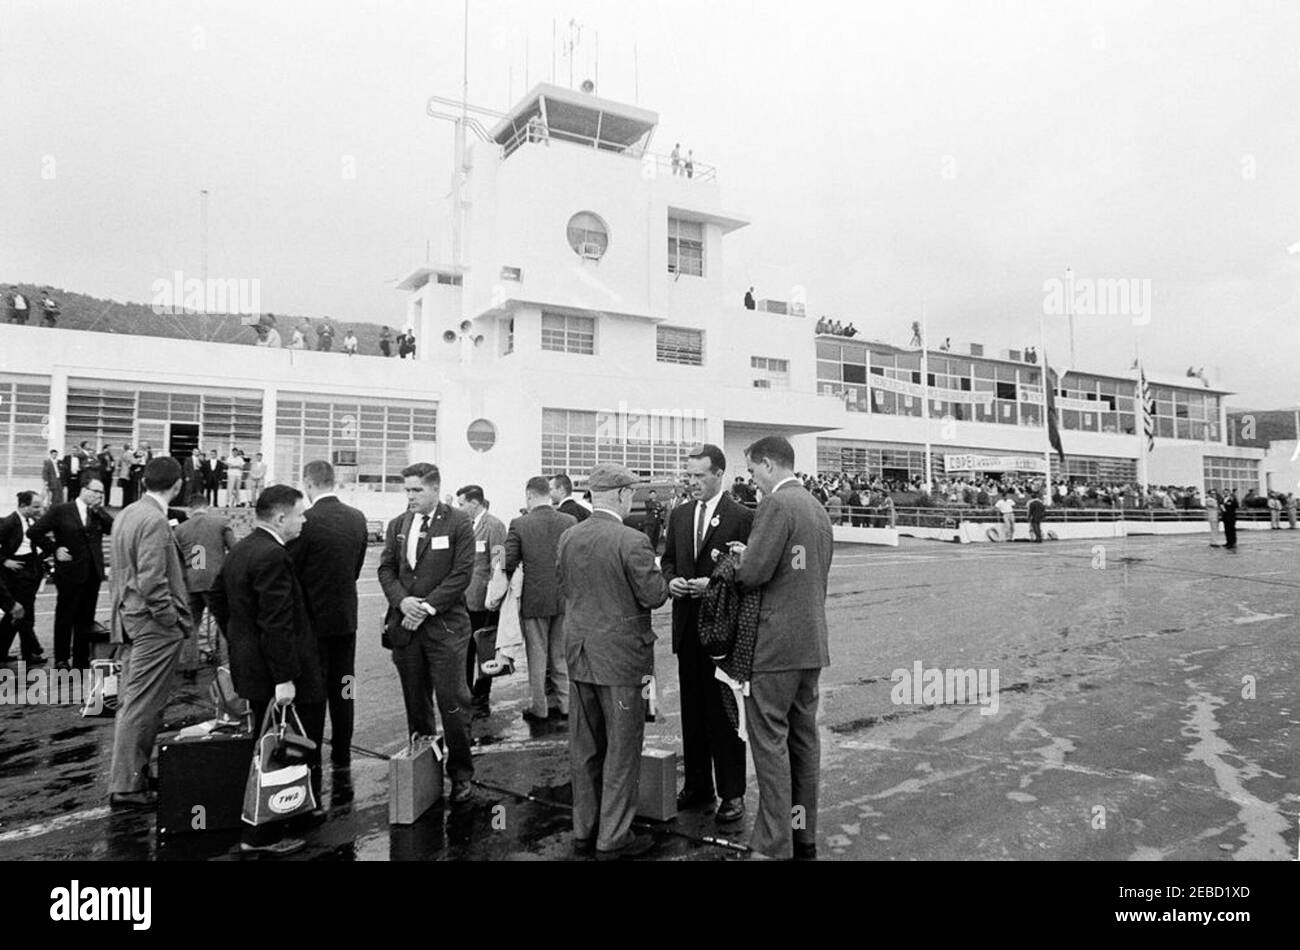 Trip to South America: Caracas, Venezuela, arrival, 9:00AM. Visitors gather at Maiquetu00eda International Airport, Caracas, Venezuela, for President John F. Kennedy and First Lady Jacqueline Kennedyu2019s arrival. White House Army Signal Agency (WHASA) officer, Jack Rubley, stands at right of group speaking to an unidentified man. Stock Photo